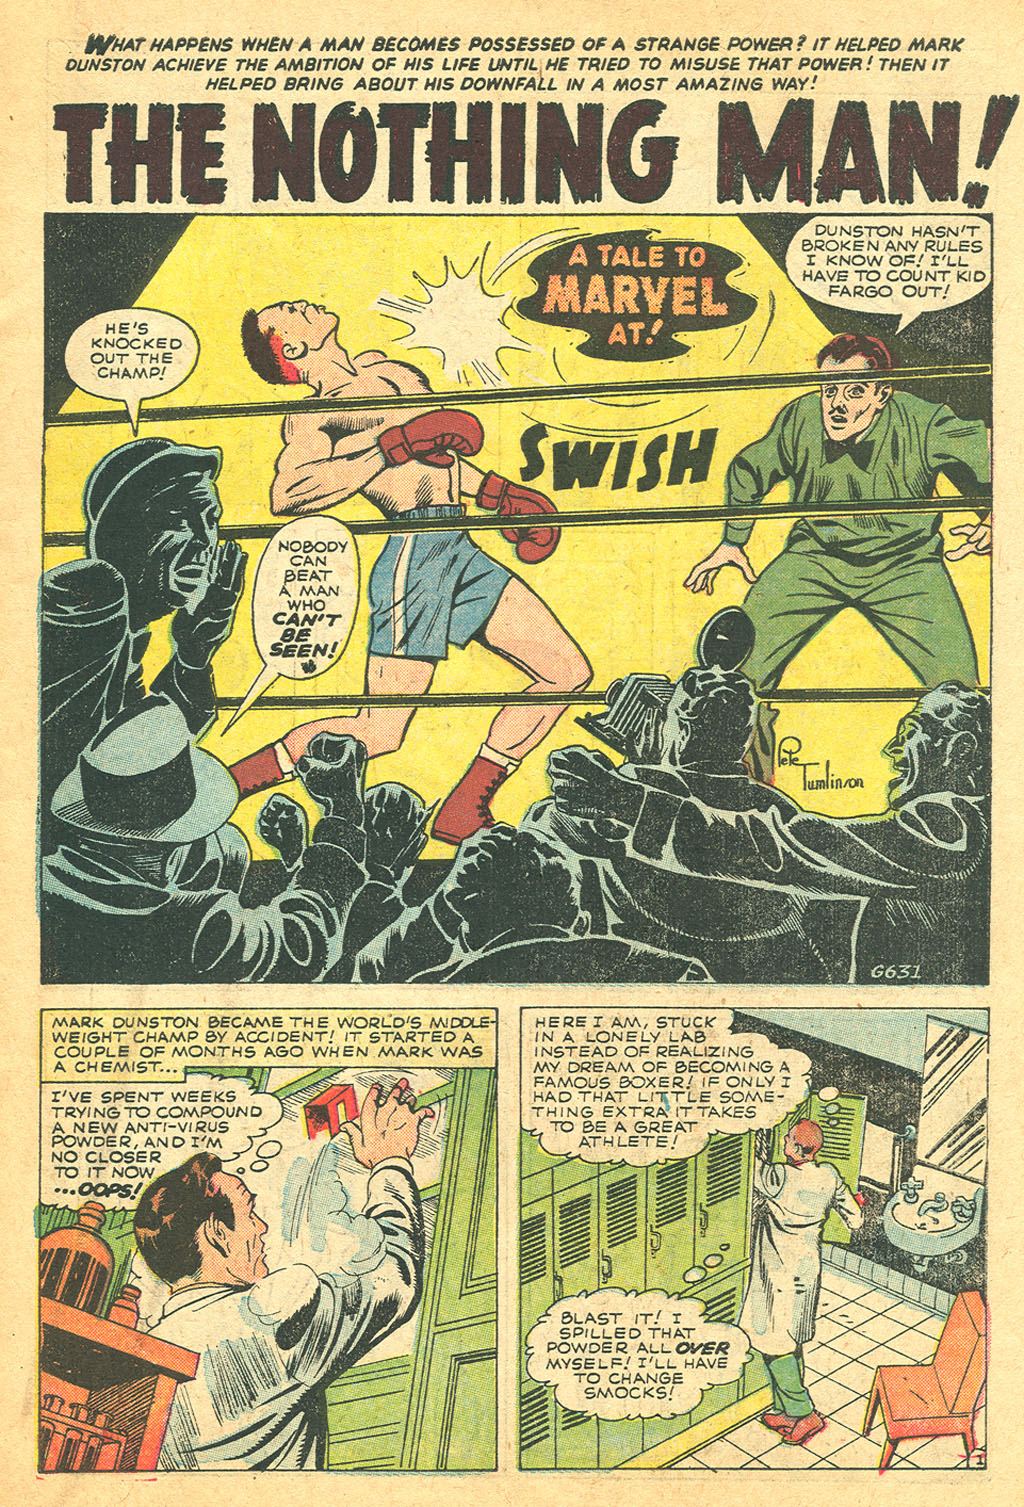 Marvel Tales (1949) 139 Page 2